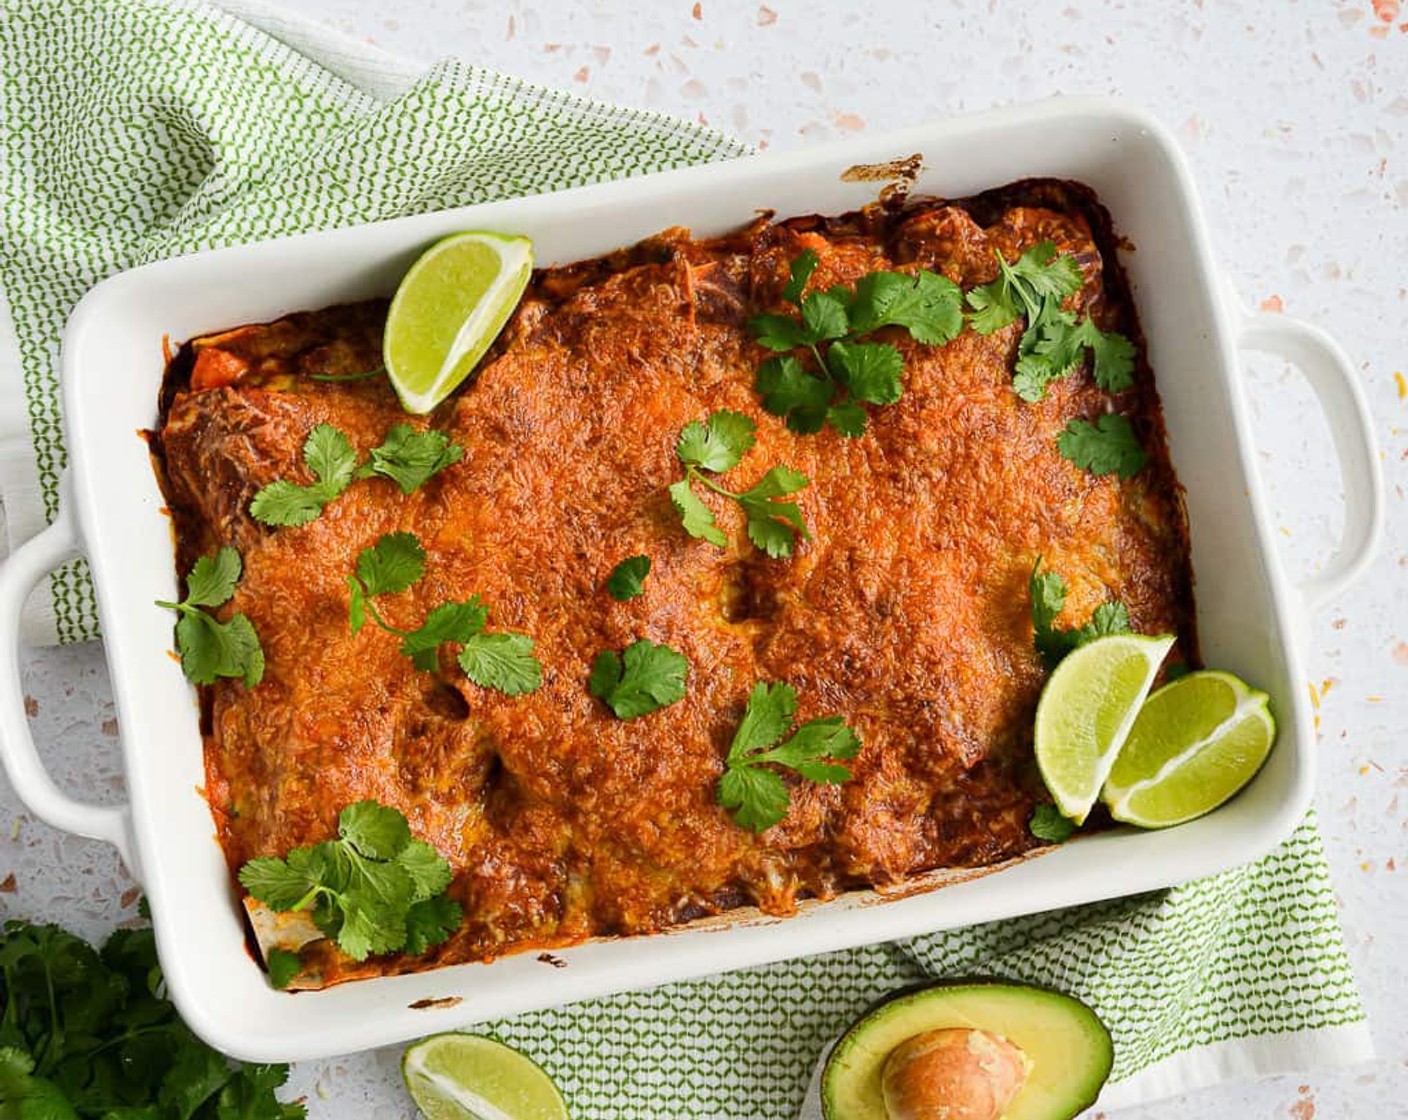 step 14 Take out of the oven and use a spatula to slice into four pieces. Serve in bowls or plates, with toppings such as Lime (1), Avocado (1), Fresh Cilantro (1 bunch), and Jalapeño Pepper (1) on top or on the side! Enjoy!